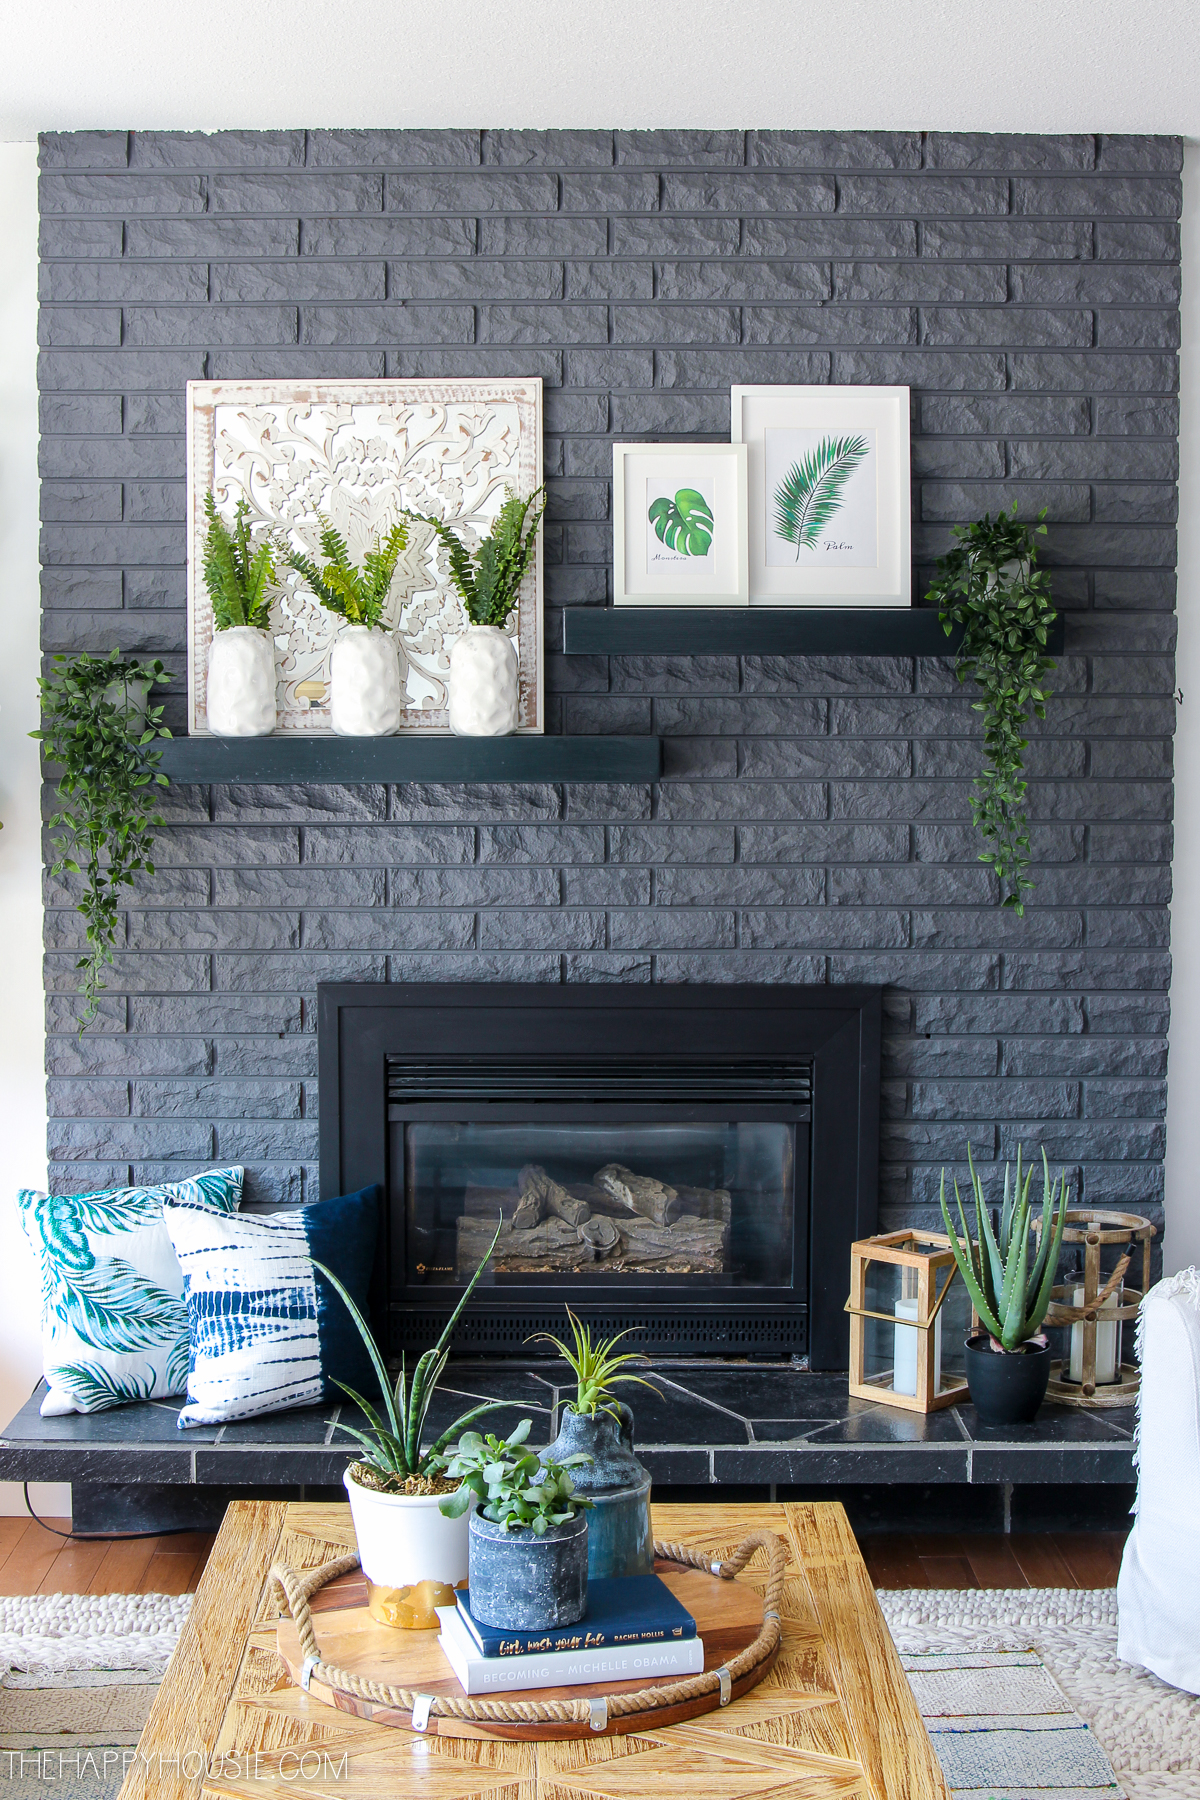 Simple White & Green Summer Mantel Decor {with free printable tropical leaf art}